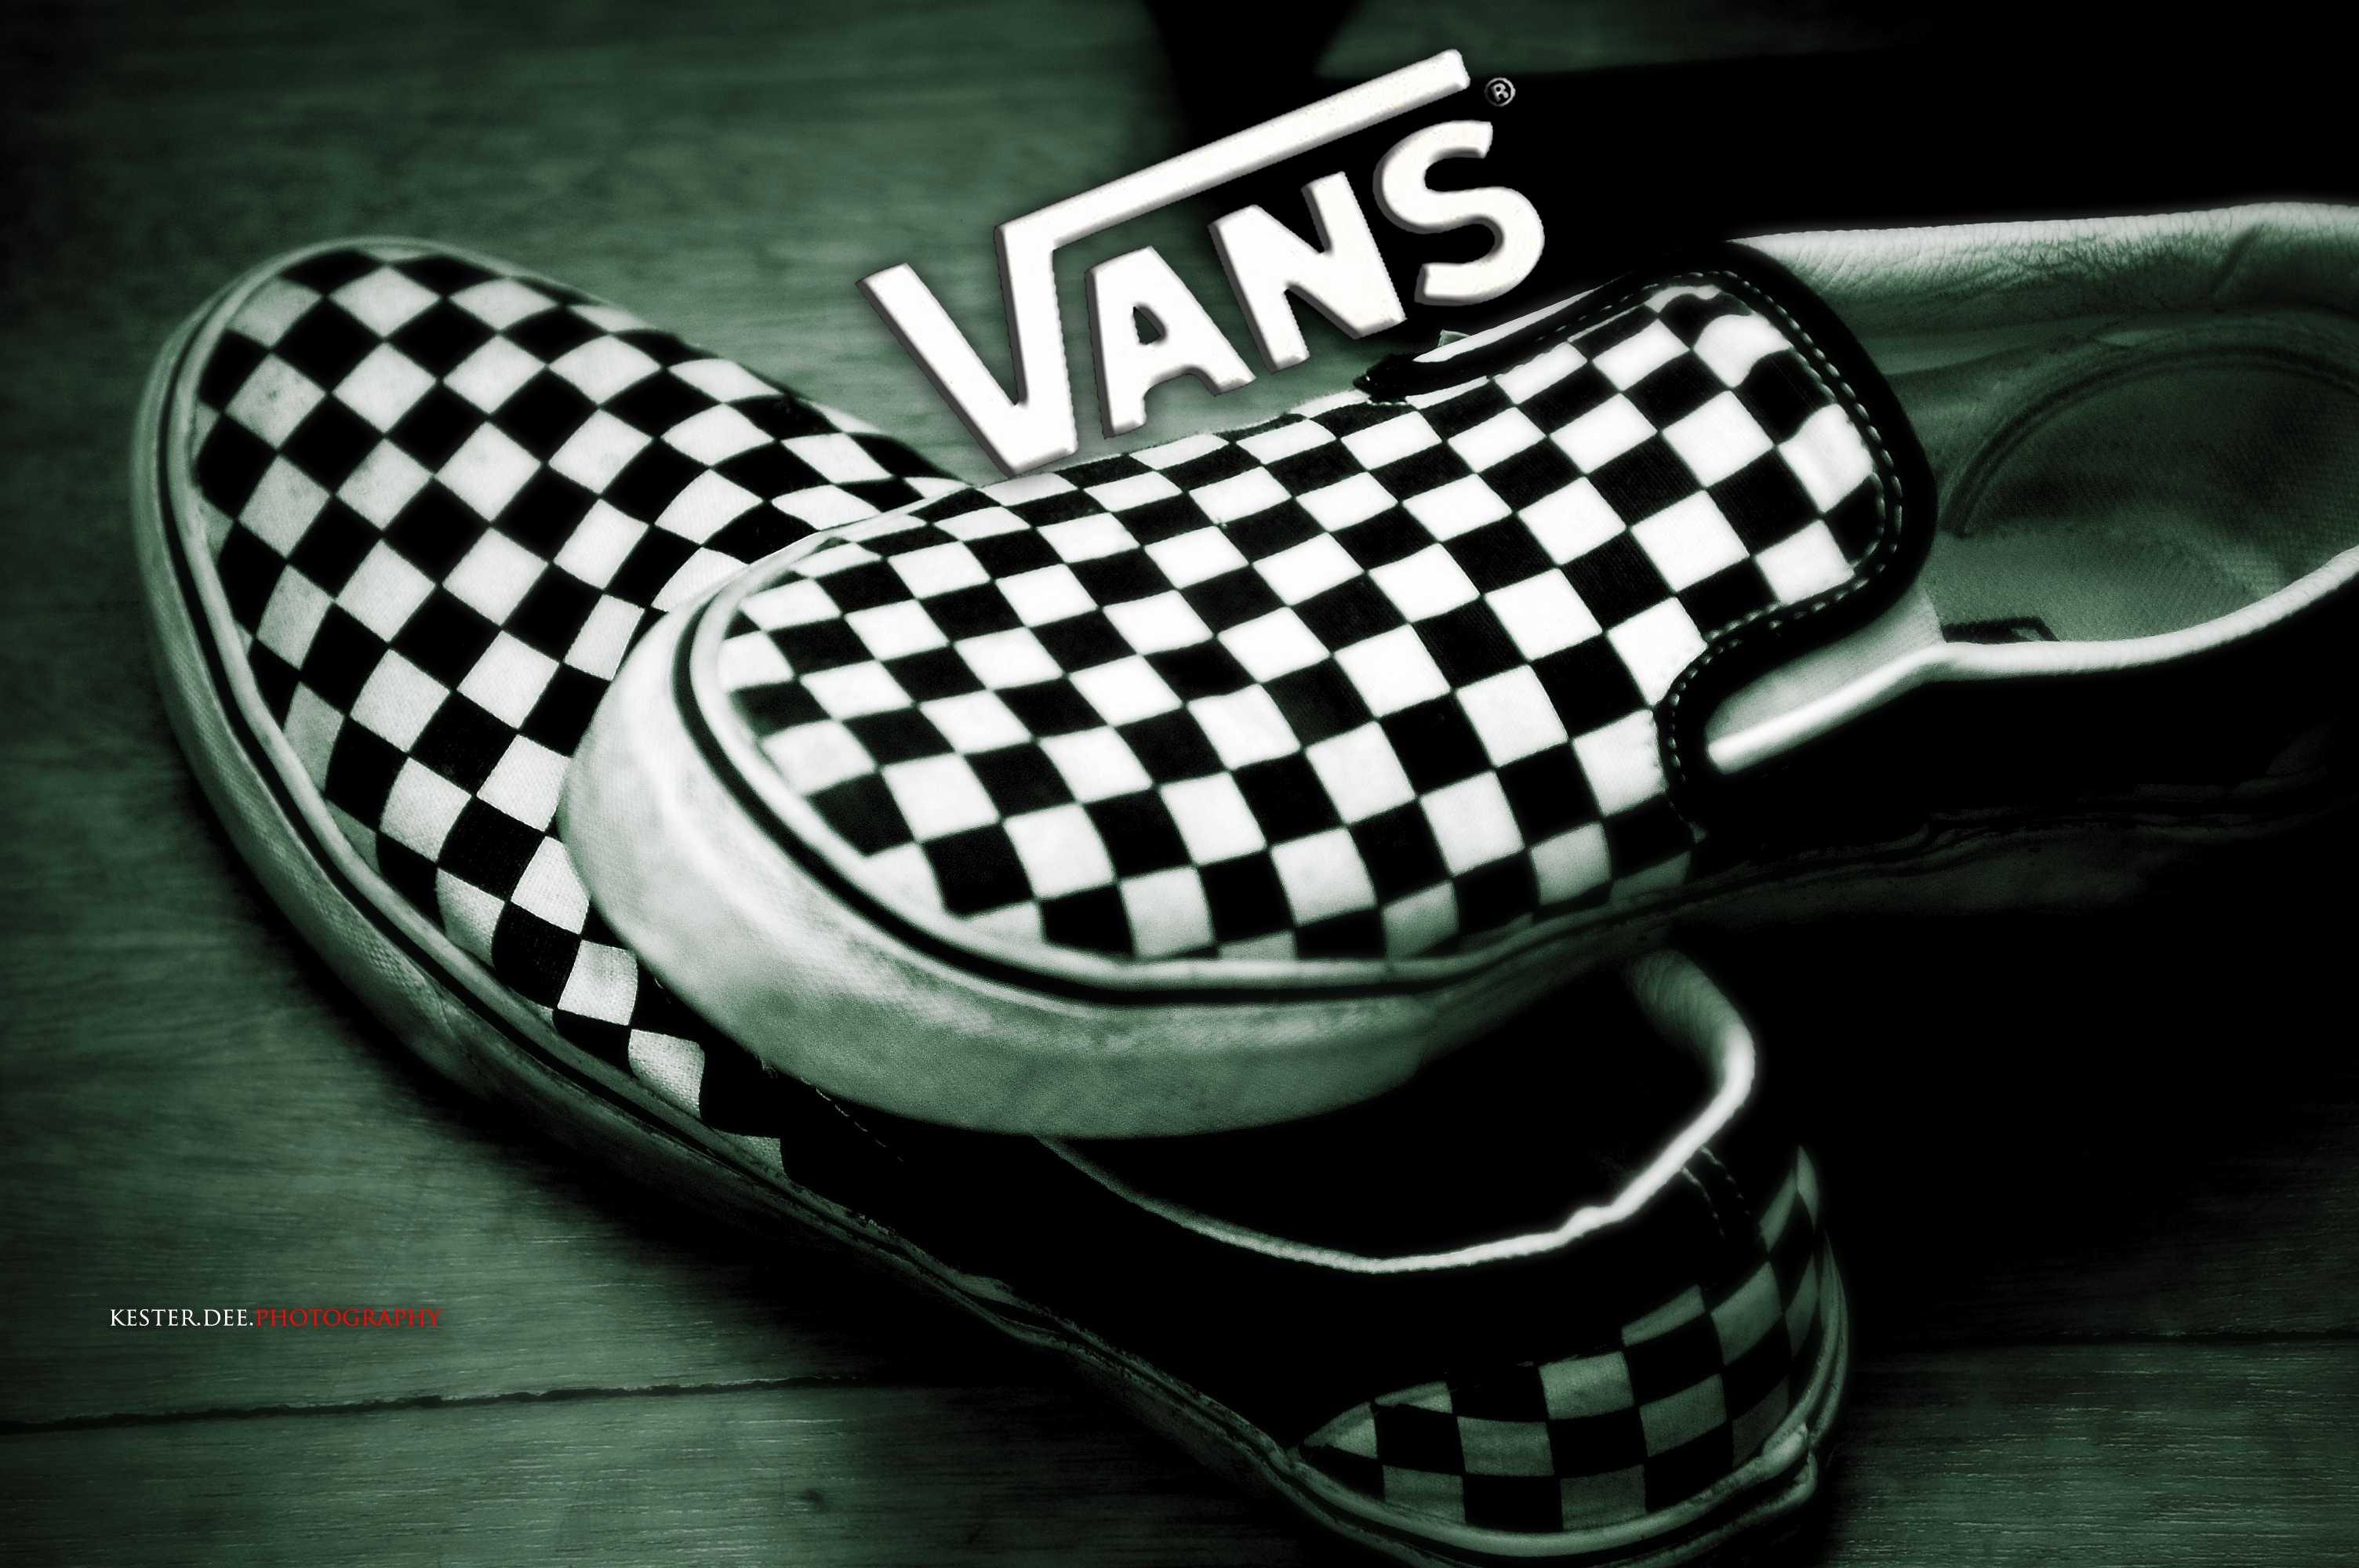 Vans Off The Wall Wallpaper background picture